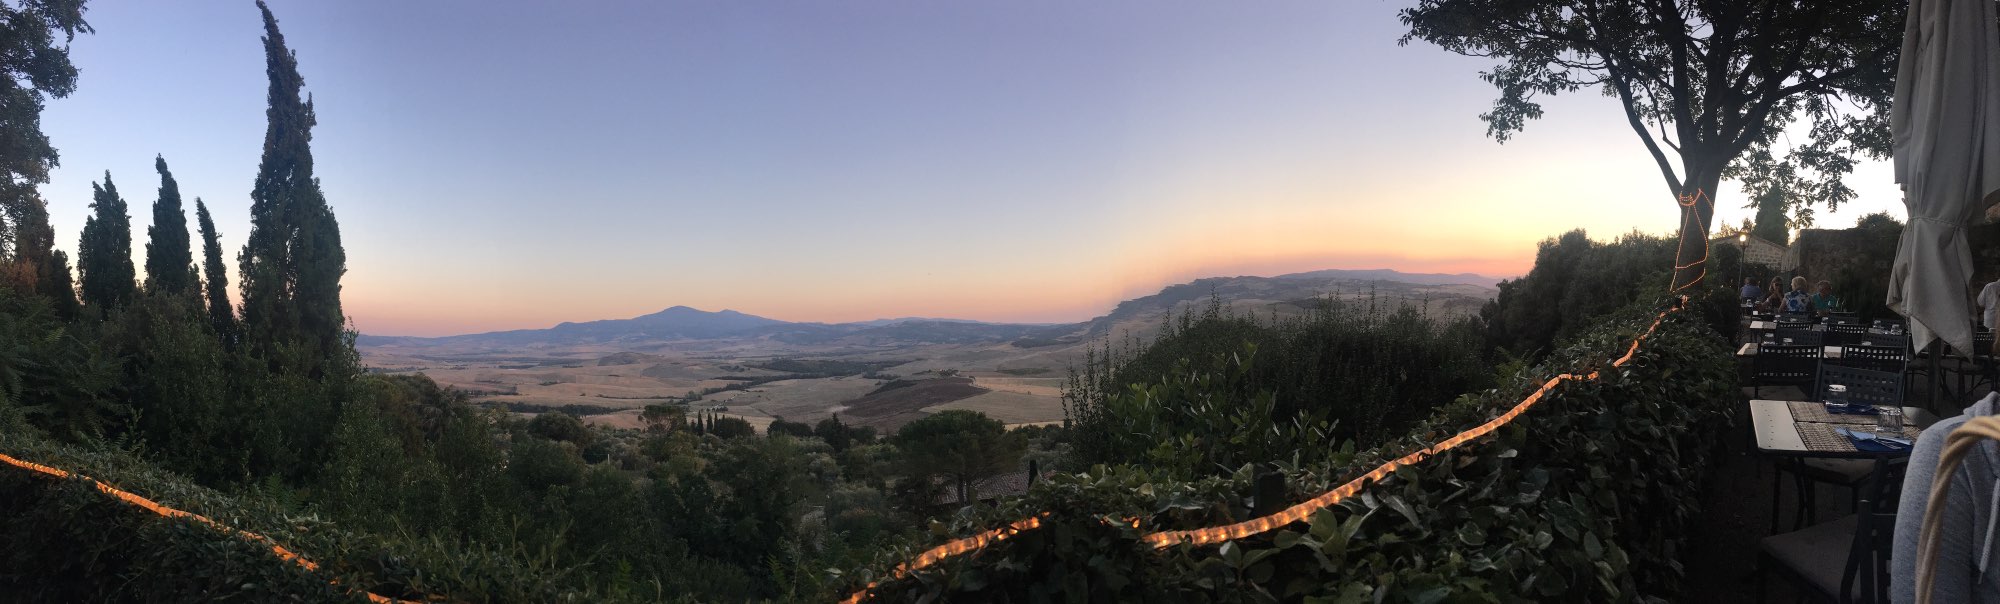 Panorama-Sicht der Terrazza Val d'Orcia